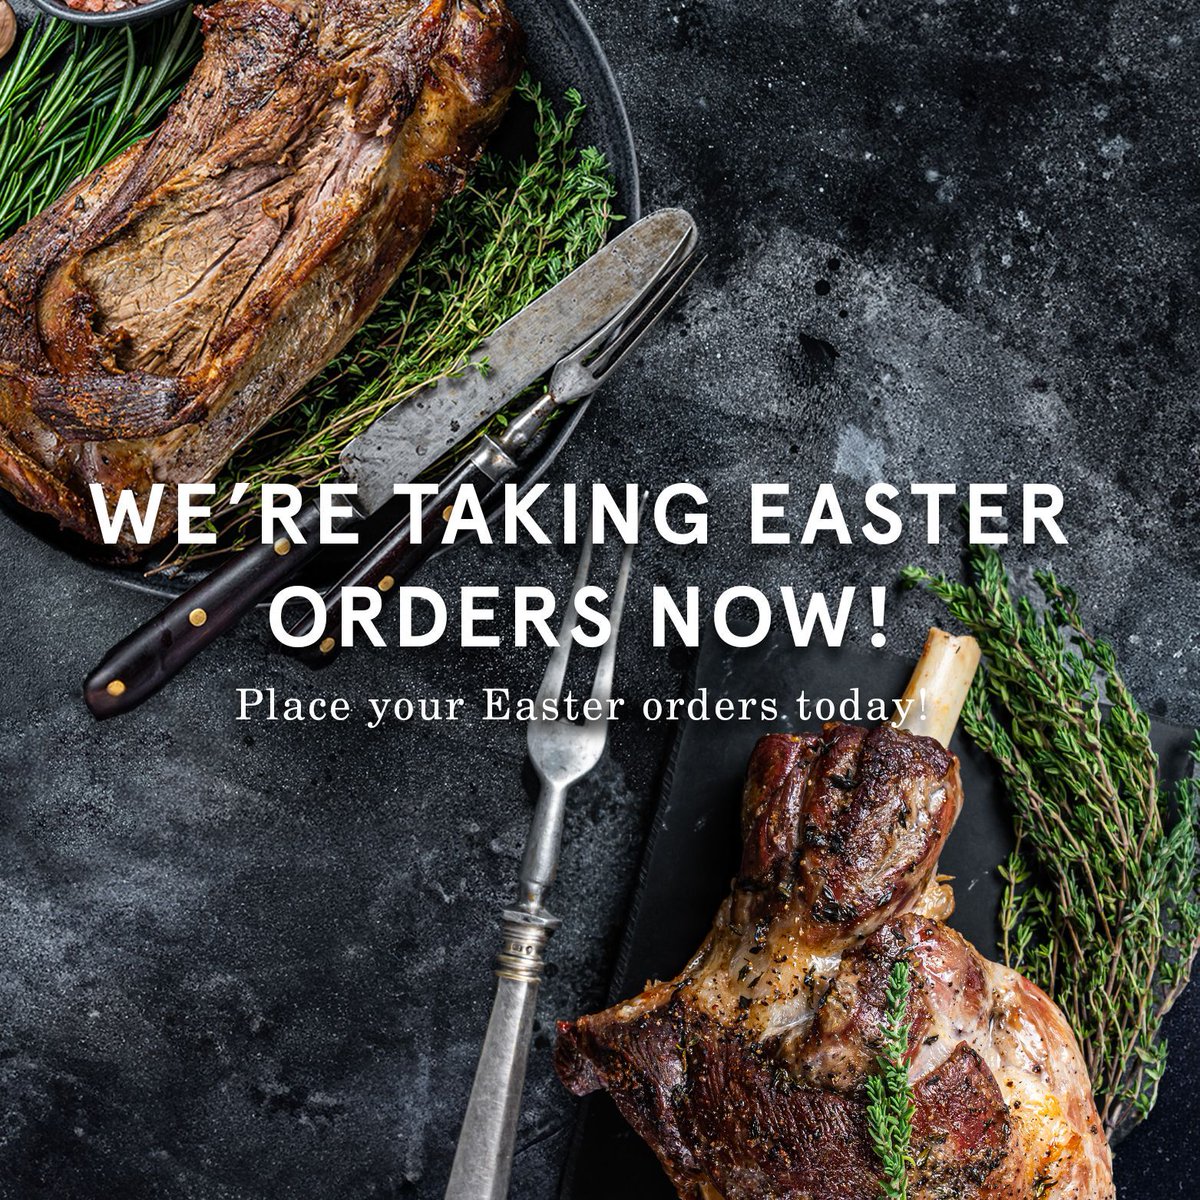 Get ahead for Easter! Place your orders now and secure your Easter goodies today! Don't miss out – reserve yours today! #EasterOrders #Easter